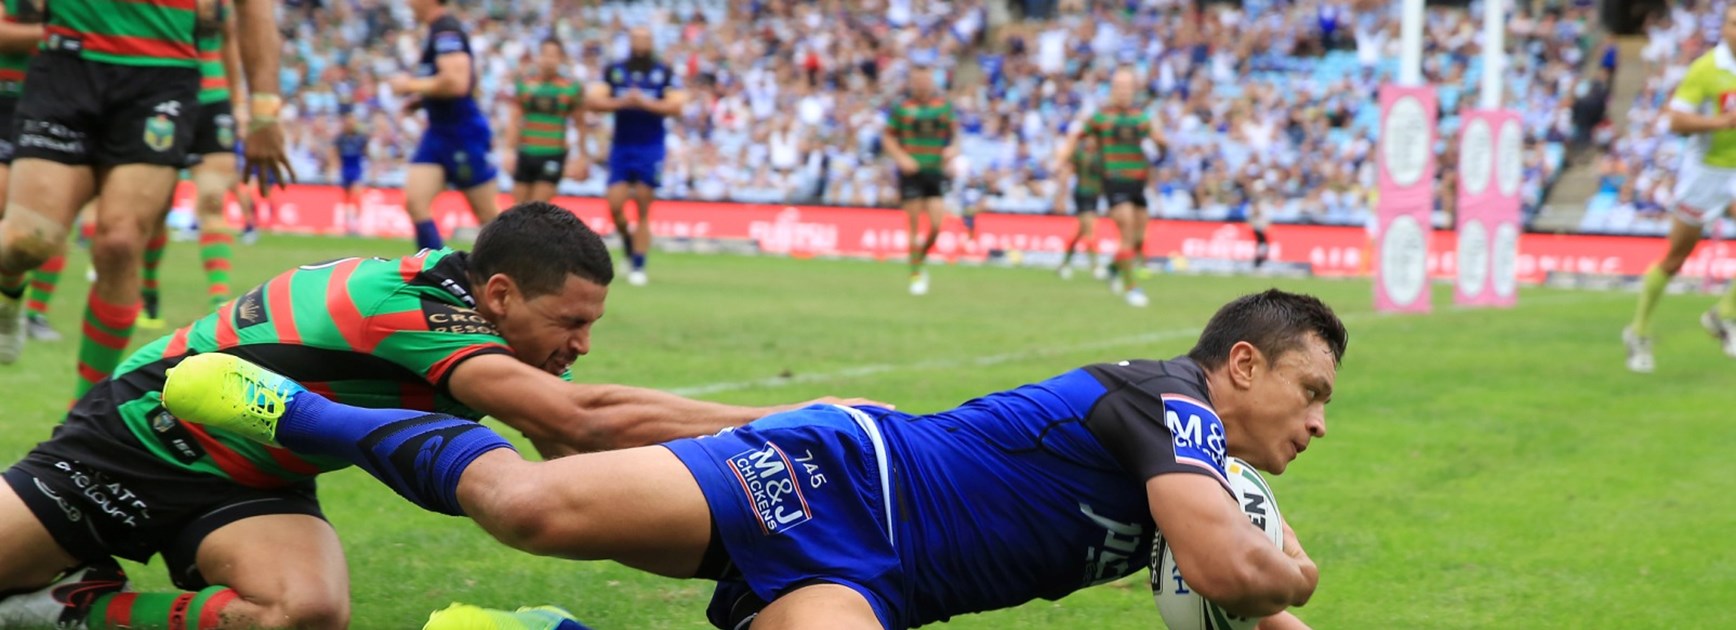 Sam Perrett scores another try for the Bulldogs against South Sydney in Round 4.